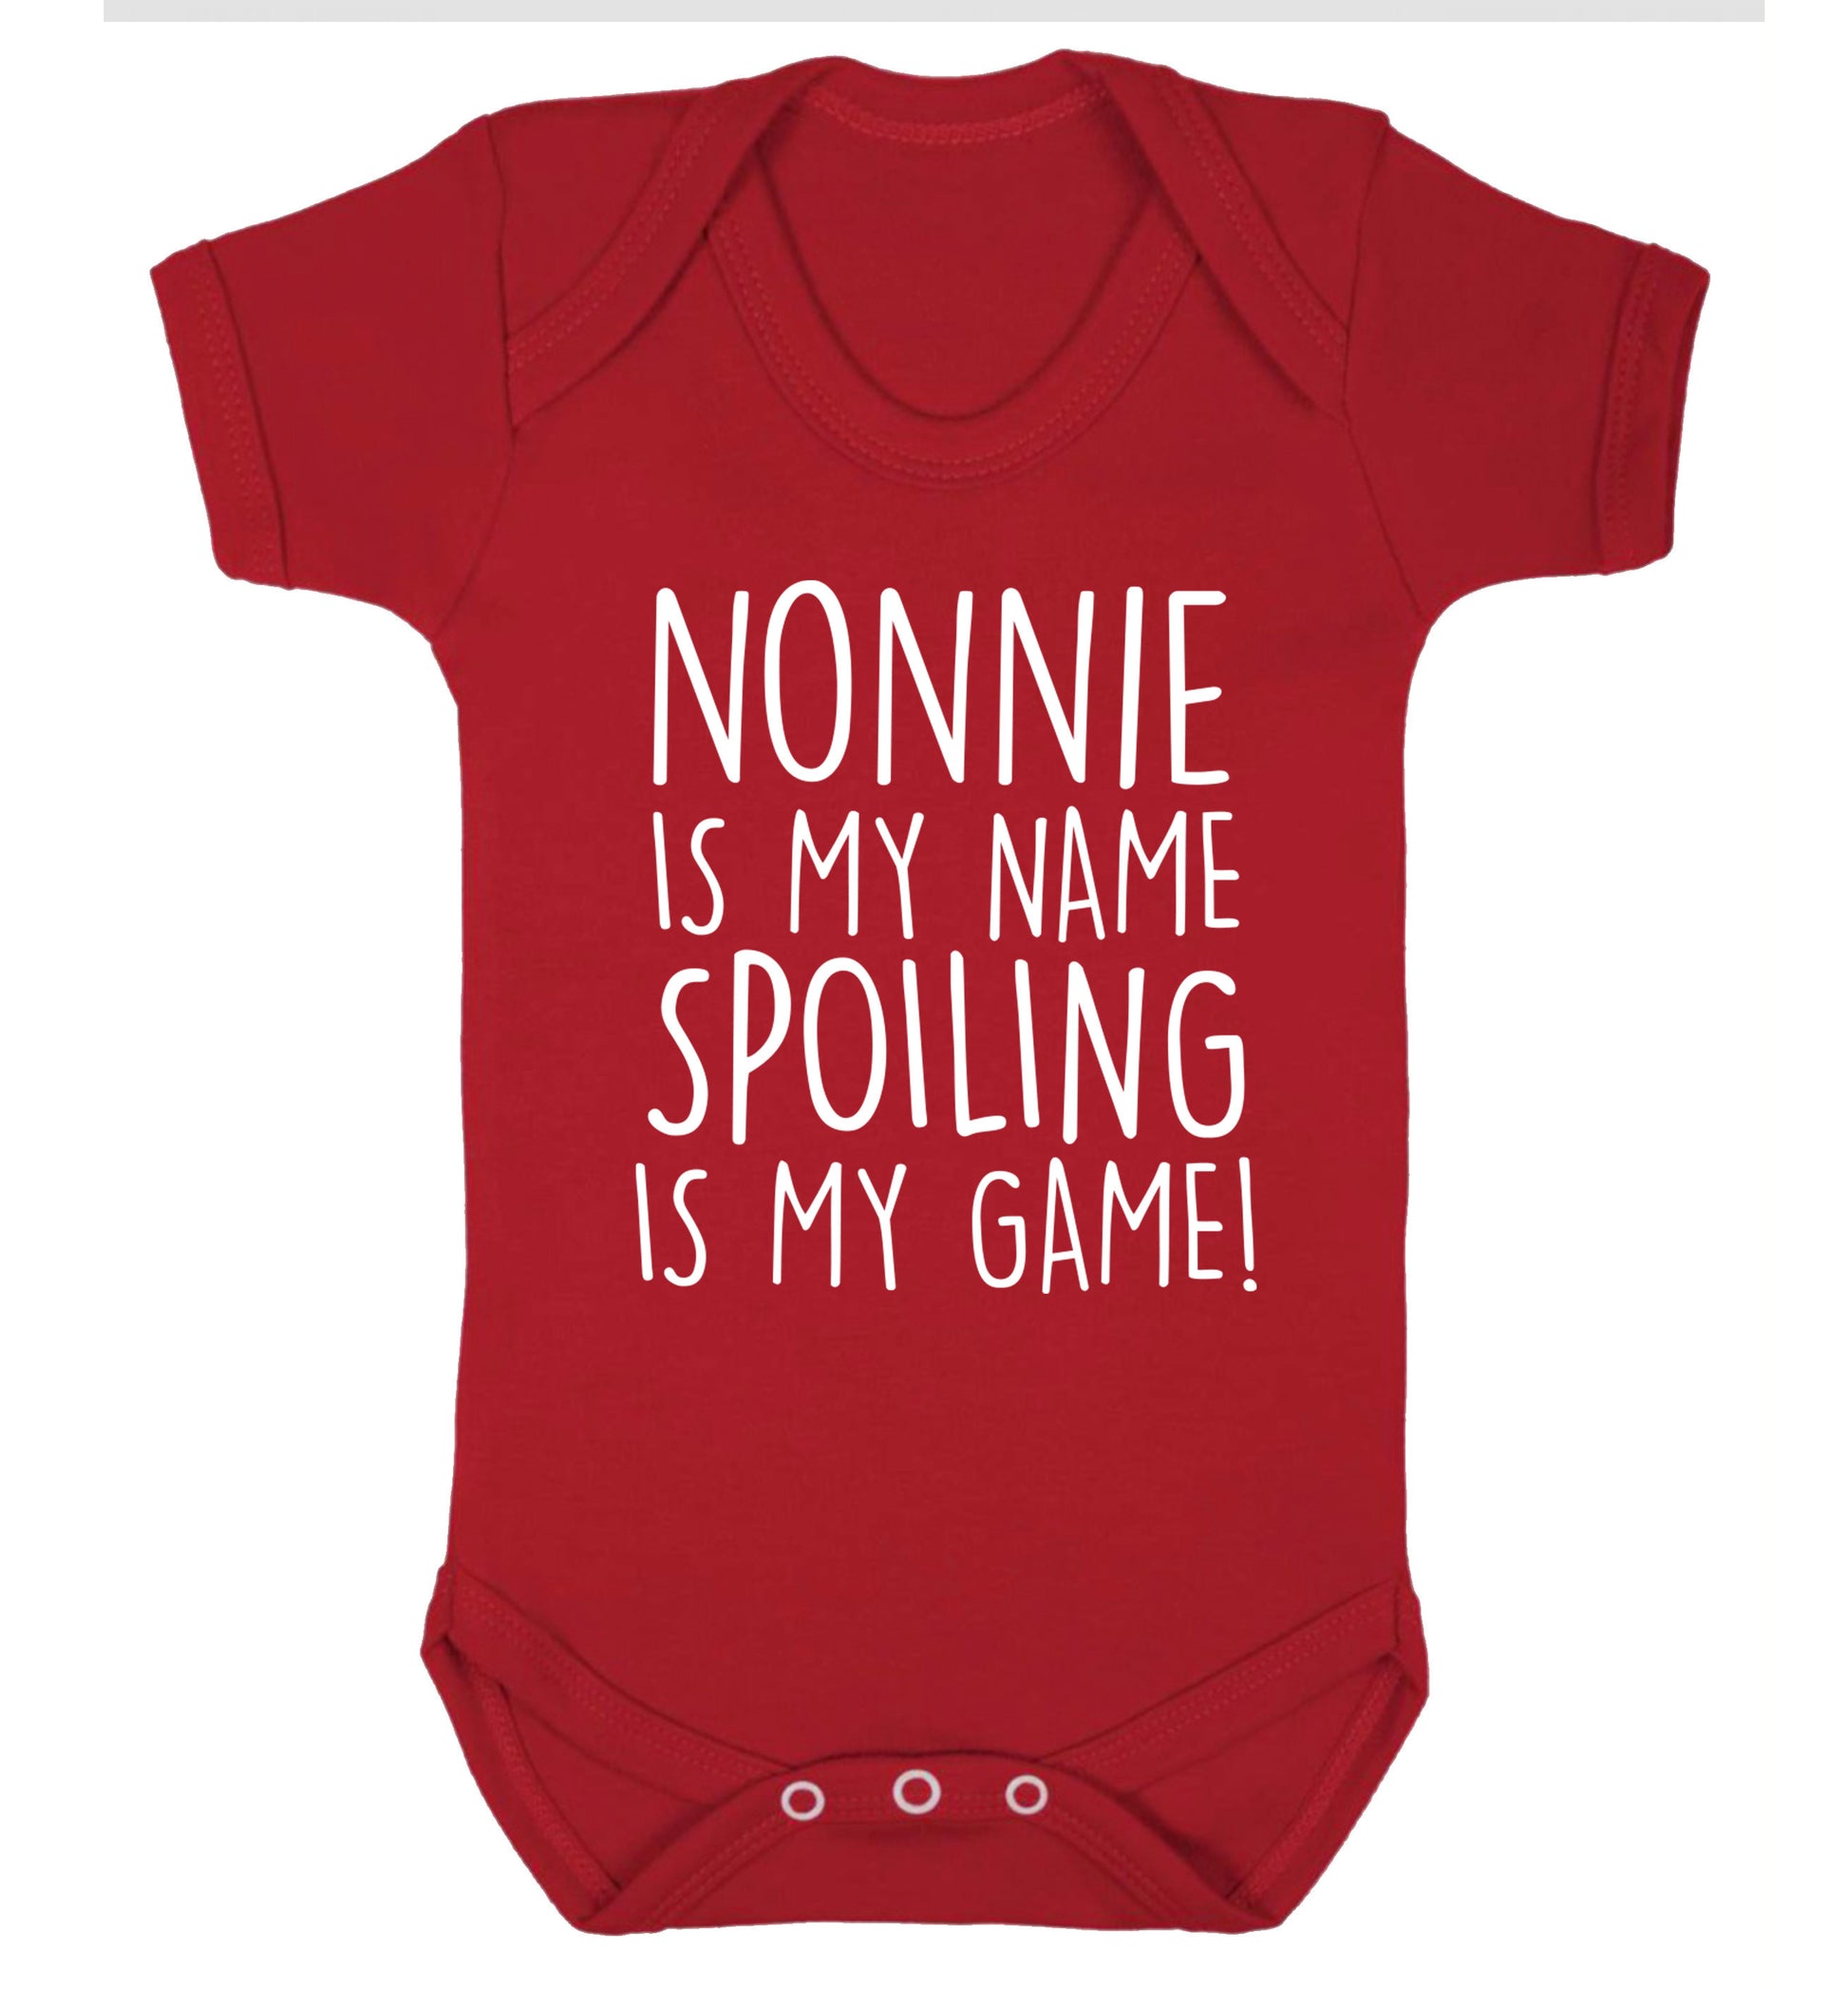 Nonnie is my name, spoiling is my game Baby Vest red 18-24 months